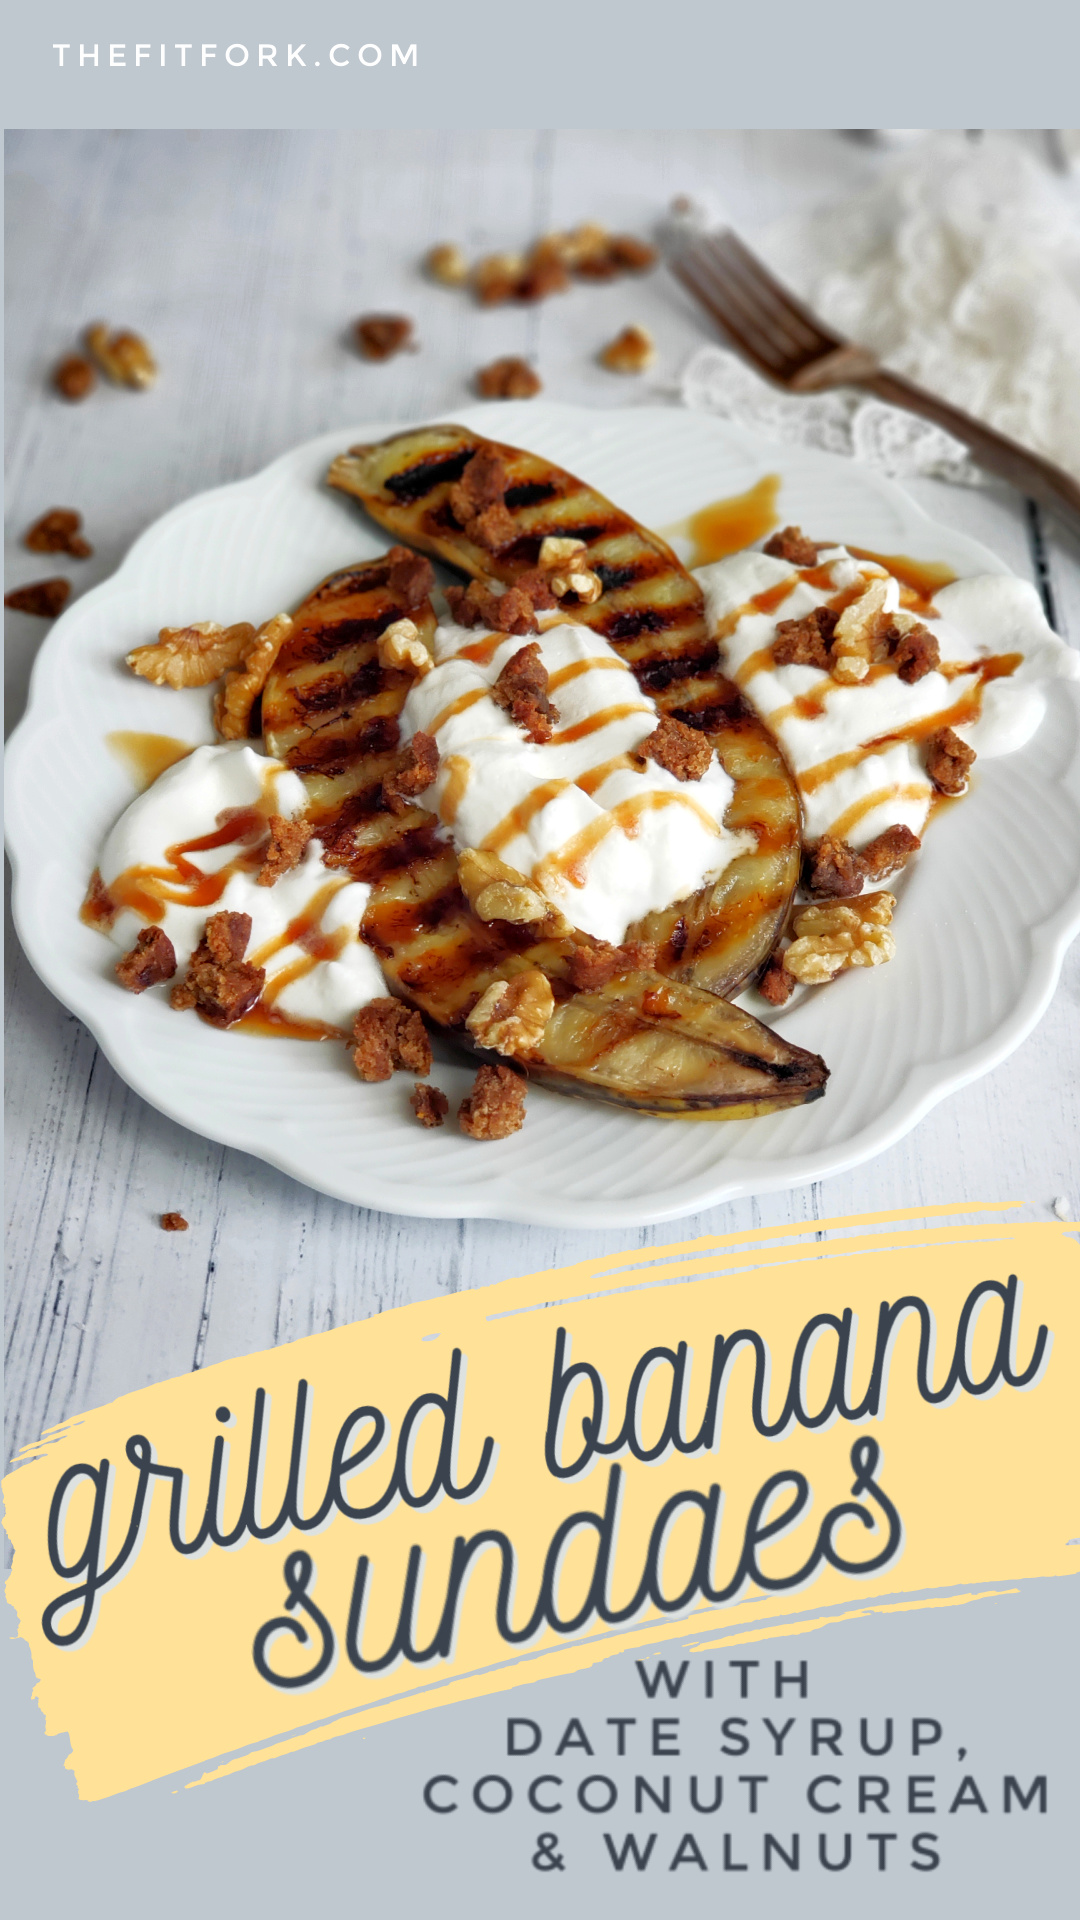 Grilled Banana Sundaes with date syrup, coconut cream and walnuts is a whole food, healthy dessert that is suitable for Paleo diets. So yummy and a great fruit snack.